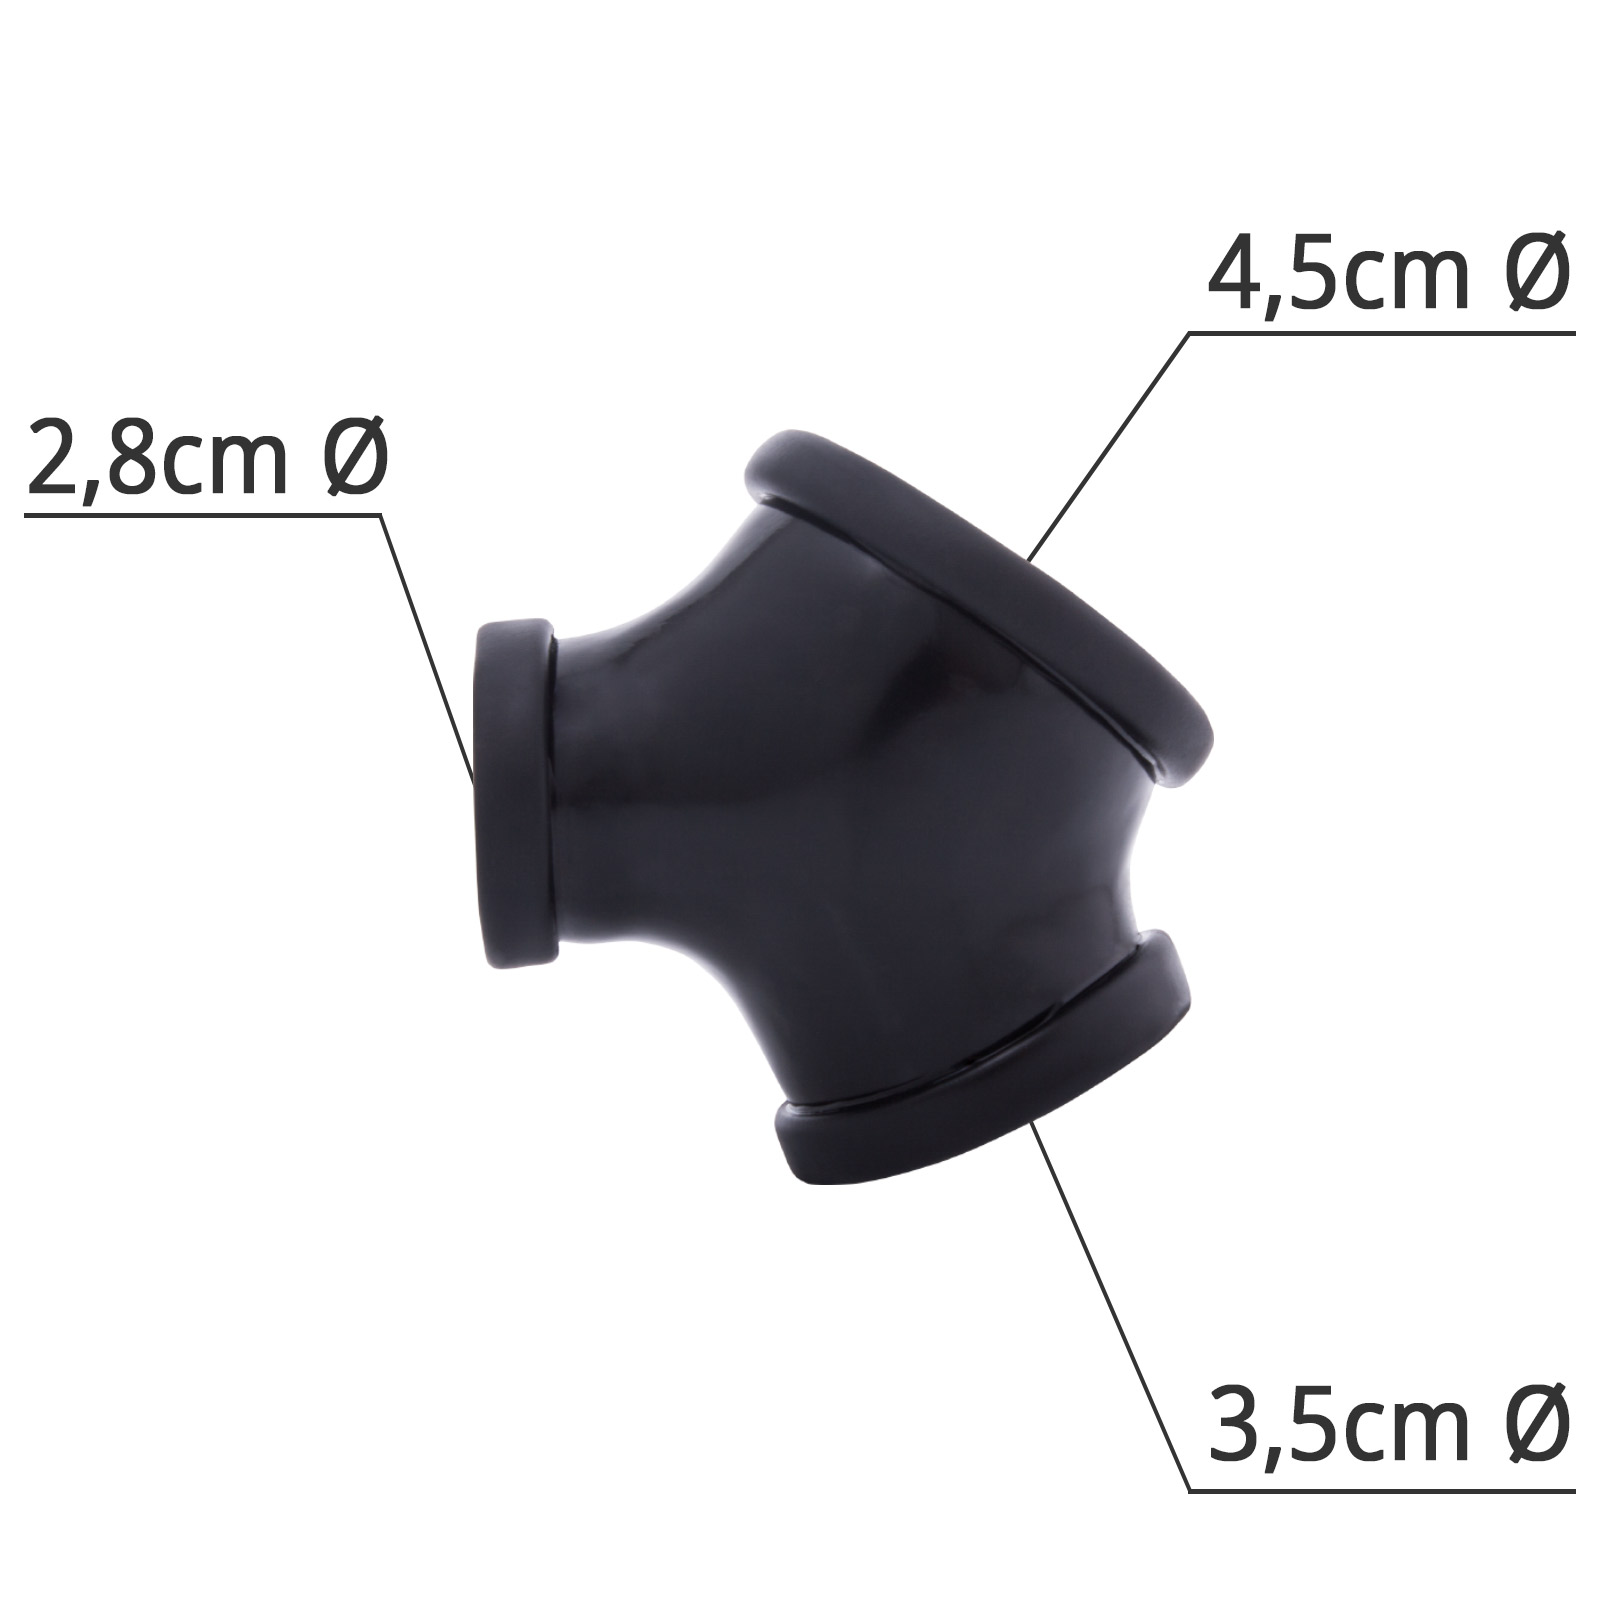 Toylie Latex Penis Sleeve «GIL» black, without shaft, with penis and testicle ring - suitable for vegans